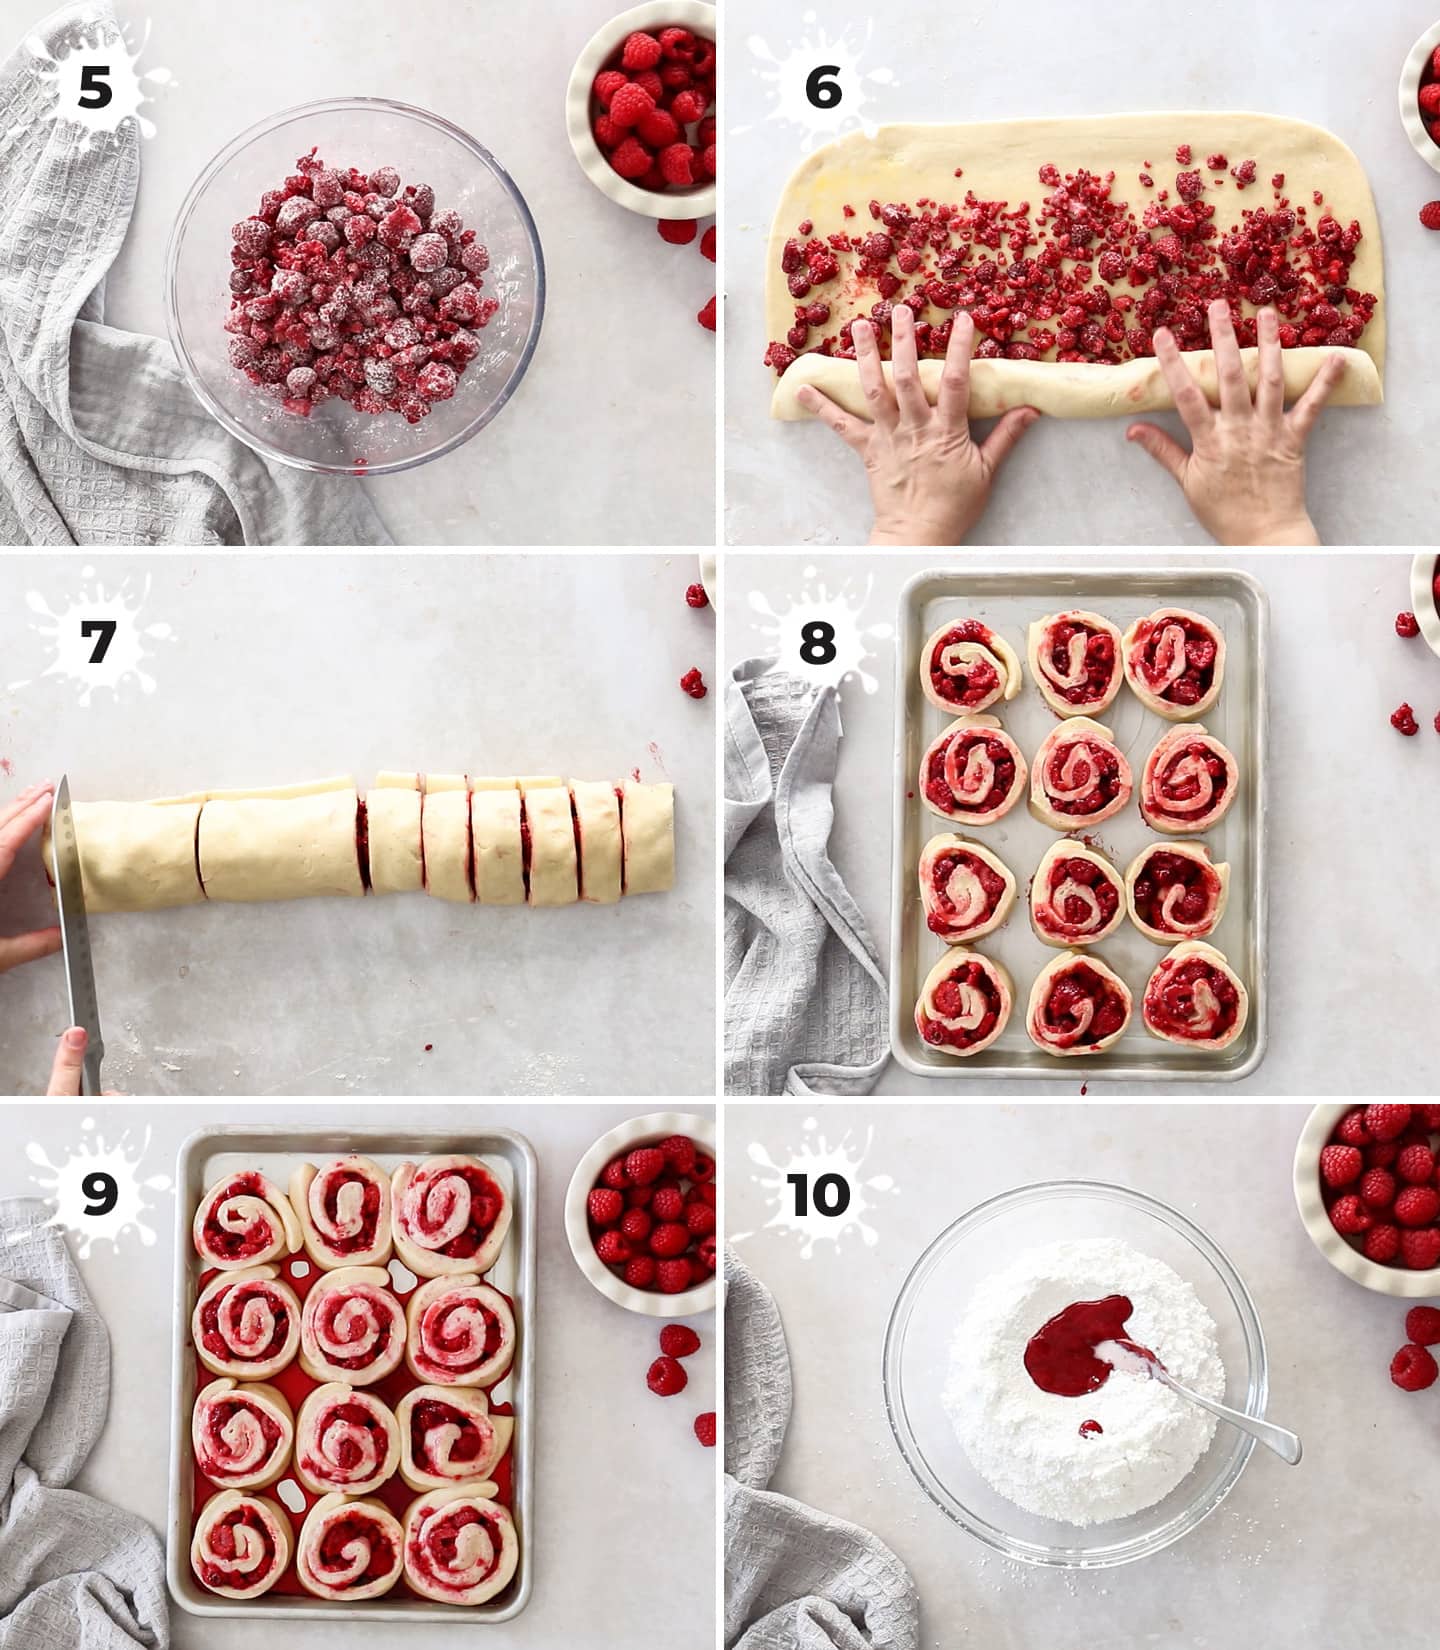 A collage of 6 images showing how to assemble the raspberry rolls.